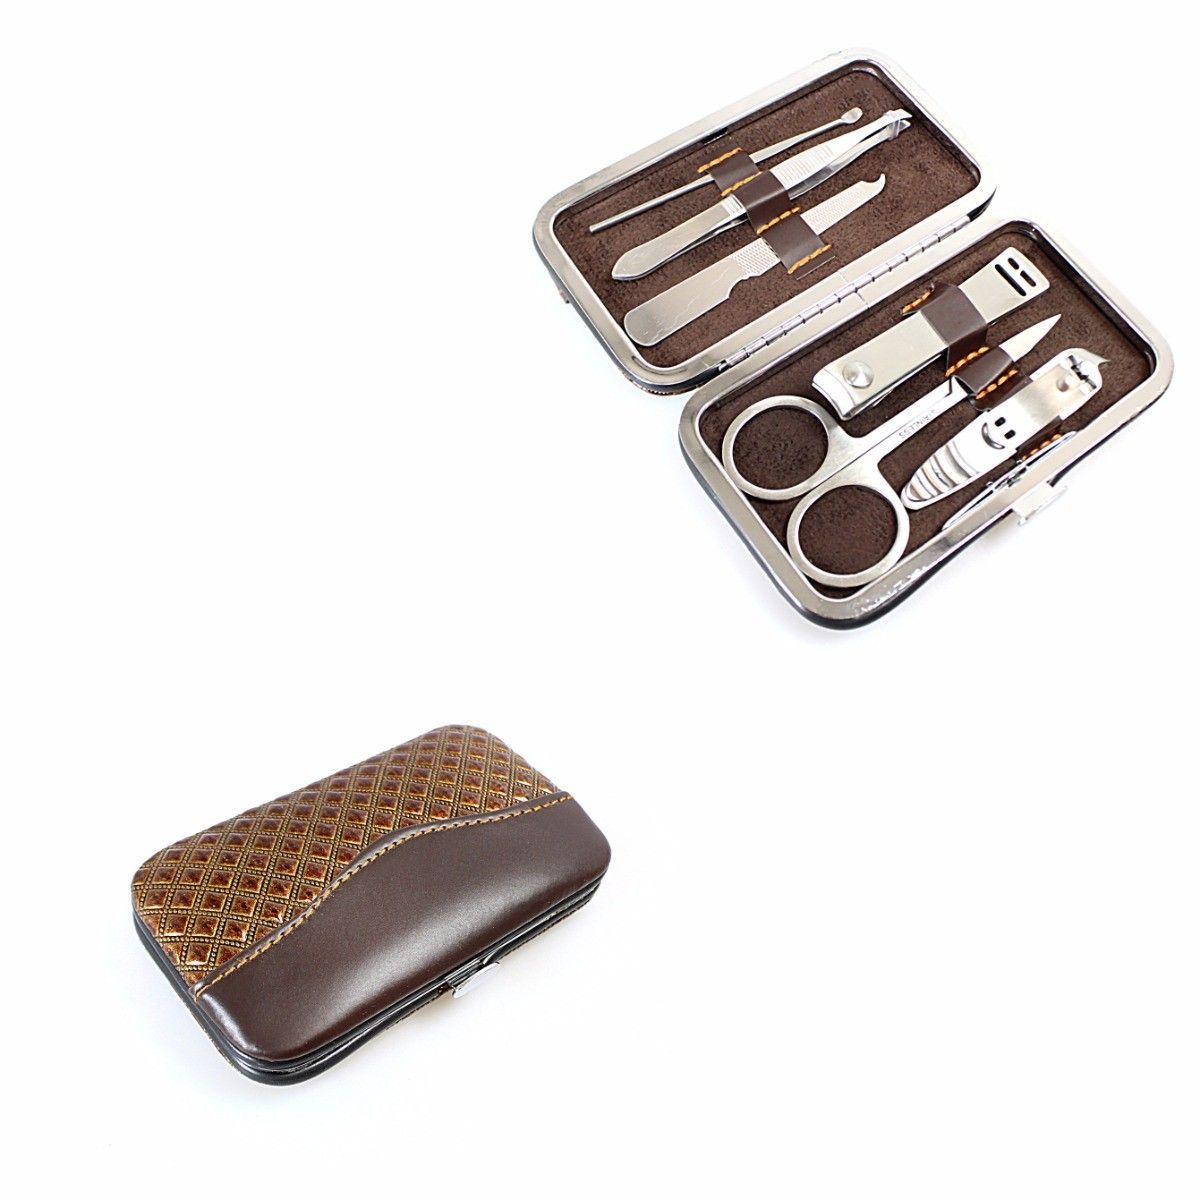 Pocket Size High Quality Designer Nail Care Pedicure Set In Stainless Steel  4159 (Large Letter Rate)